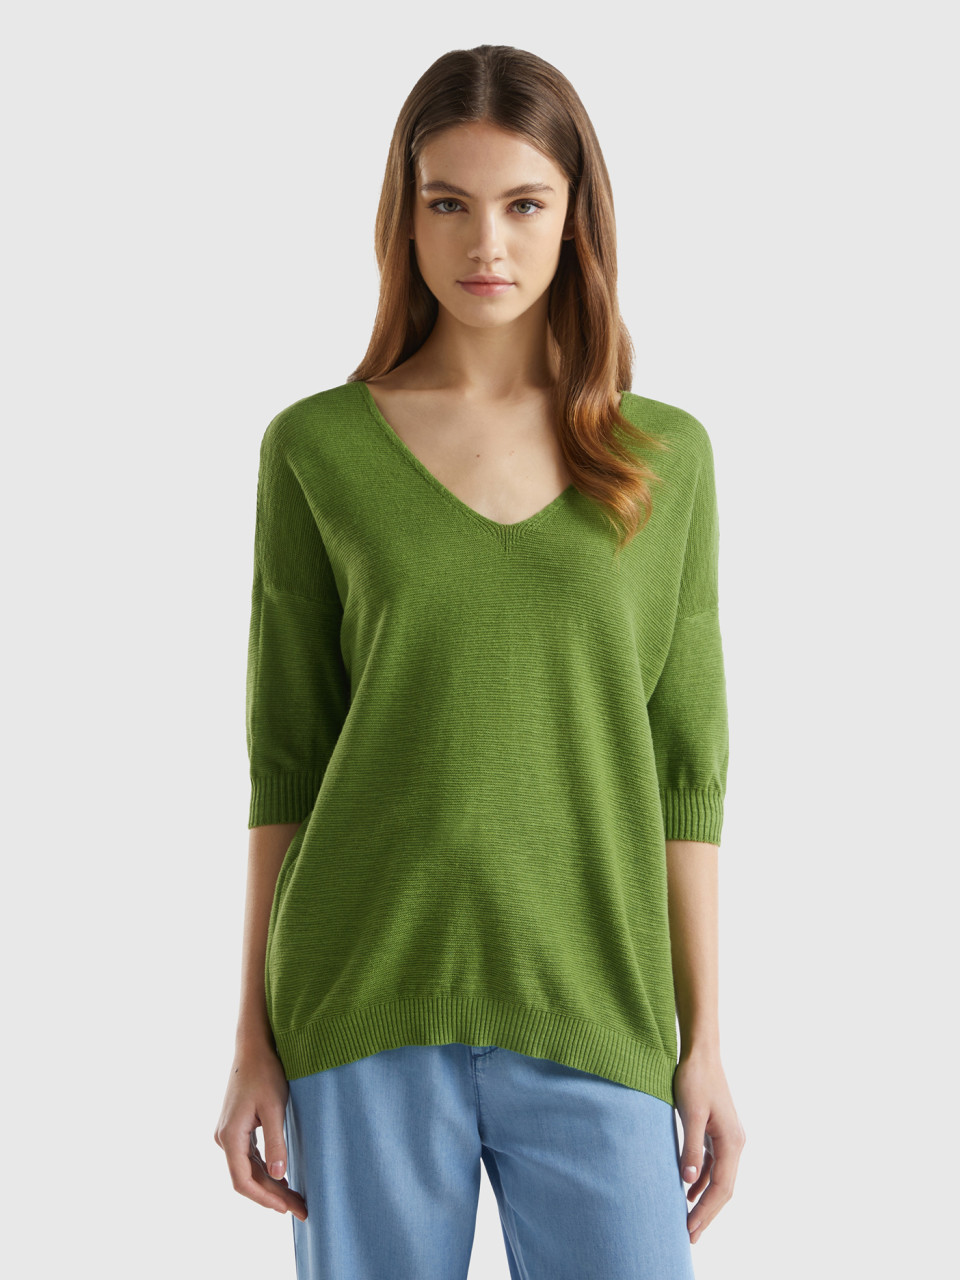 Benetton, Sweater In Linen And Cotton Blend, Military Green, Women